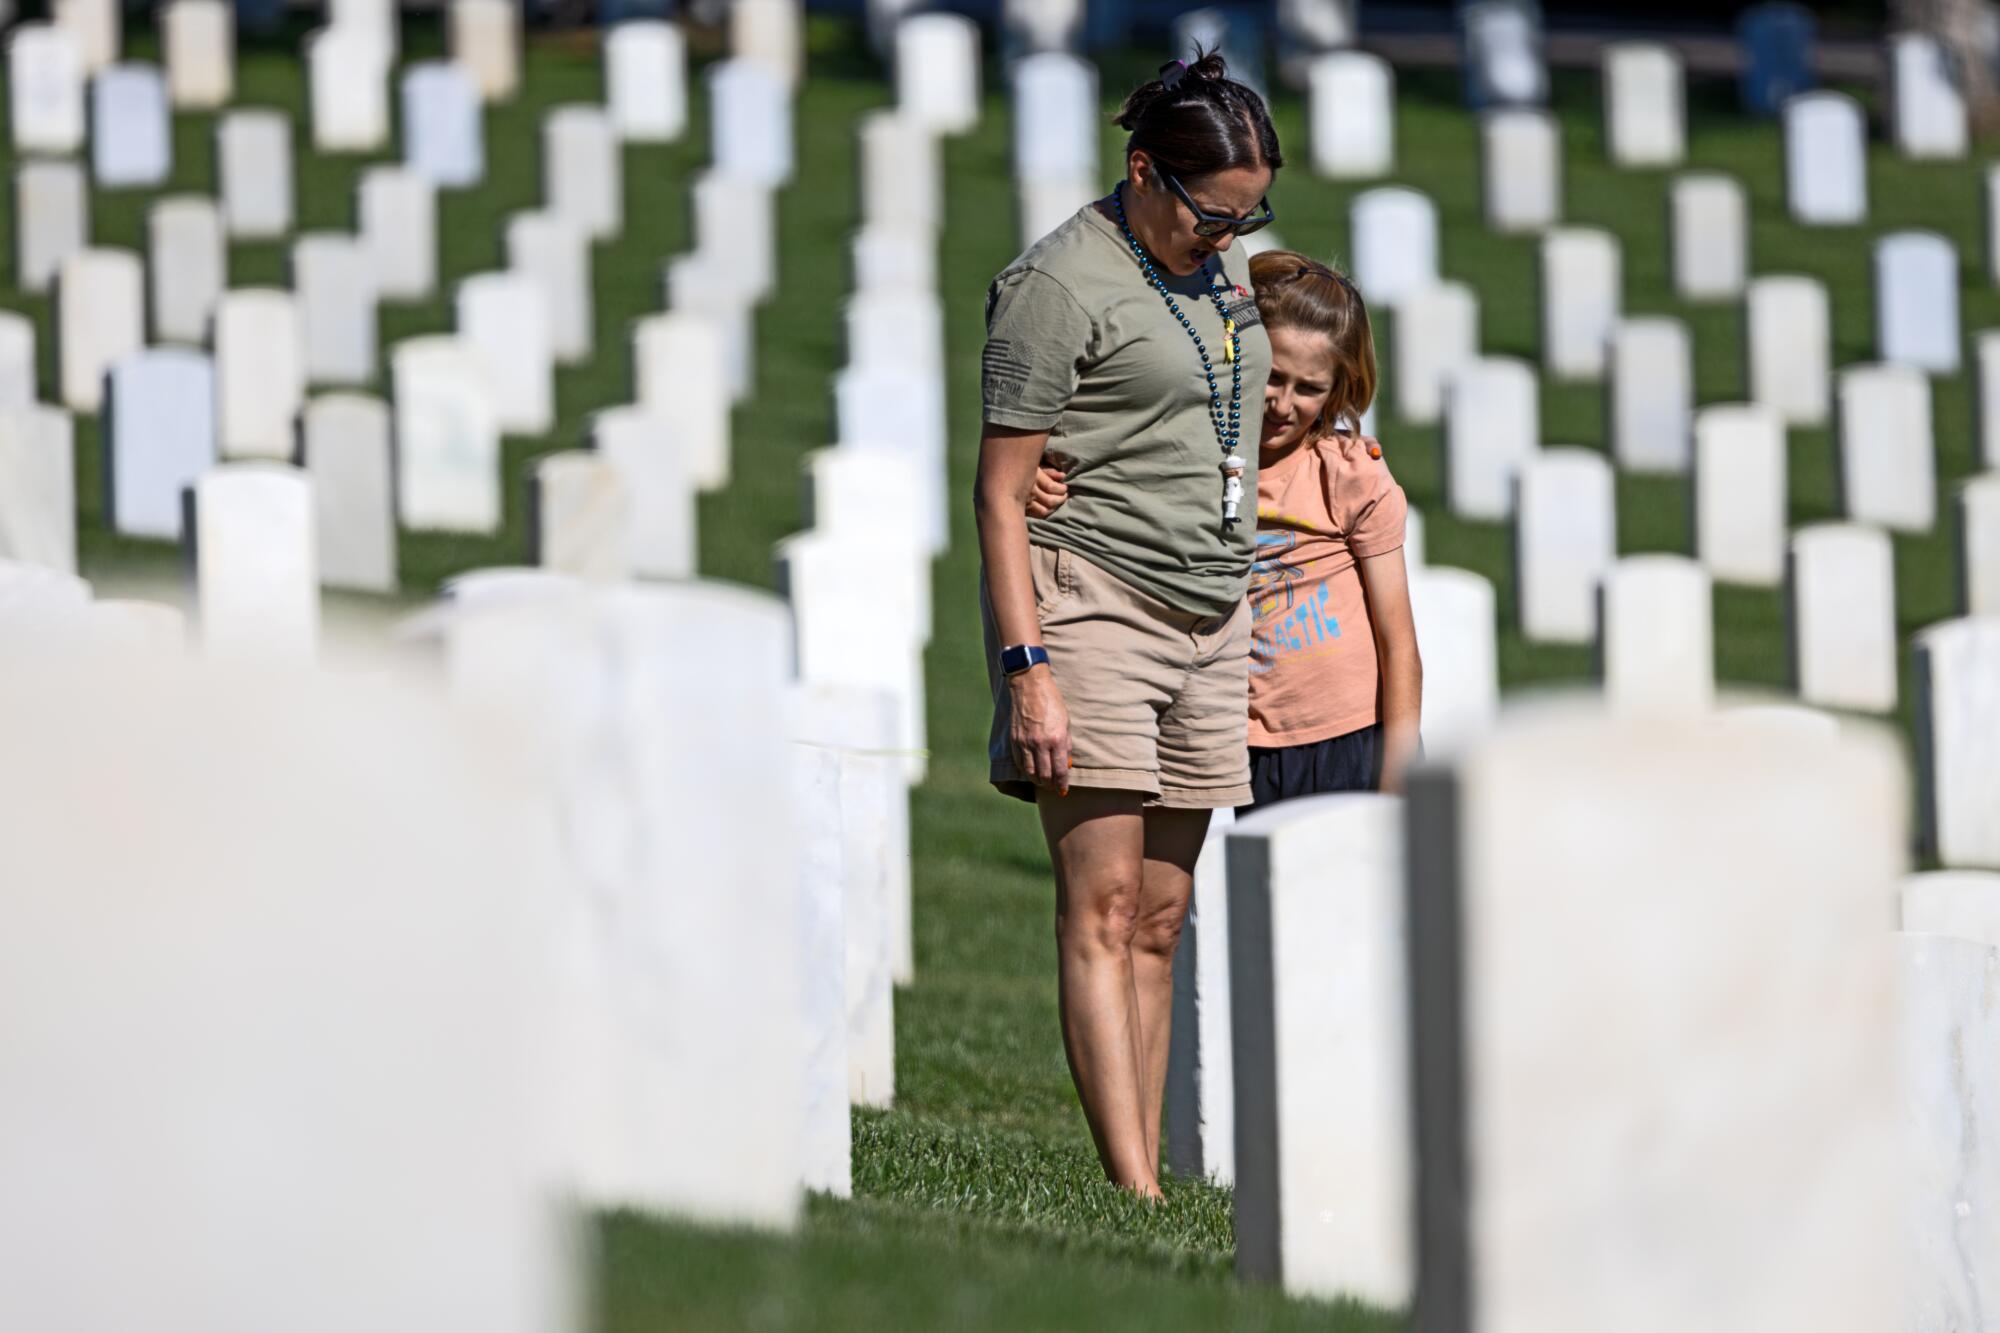 U.S. Navy veteran Ruth Pico and son Nathan, 8, stand among neat lines of white headstones in the green grass